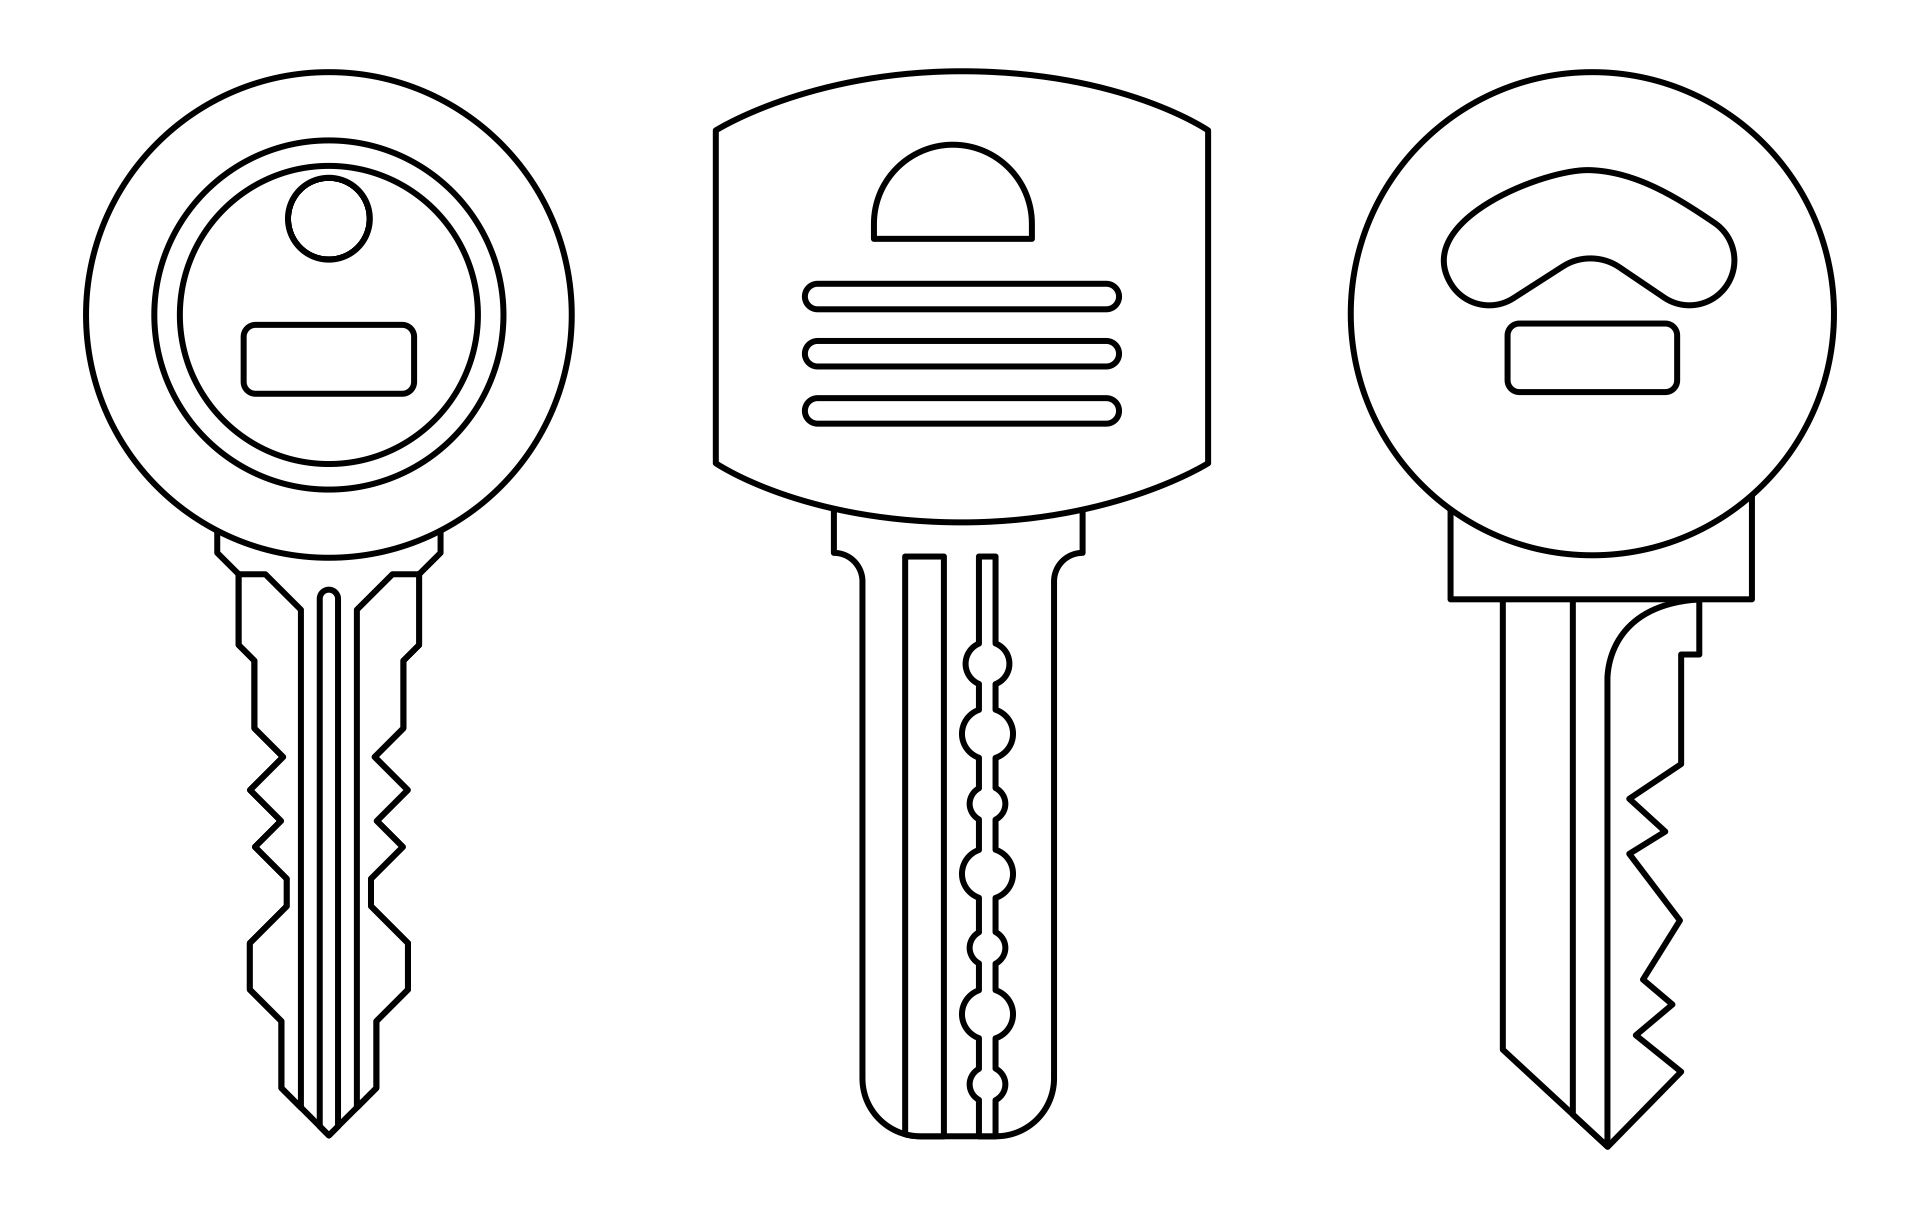 7-best-images-of-printable-picture-of-a-key-key-outline-clip-art